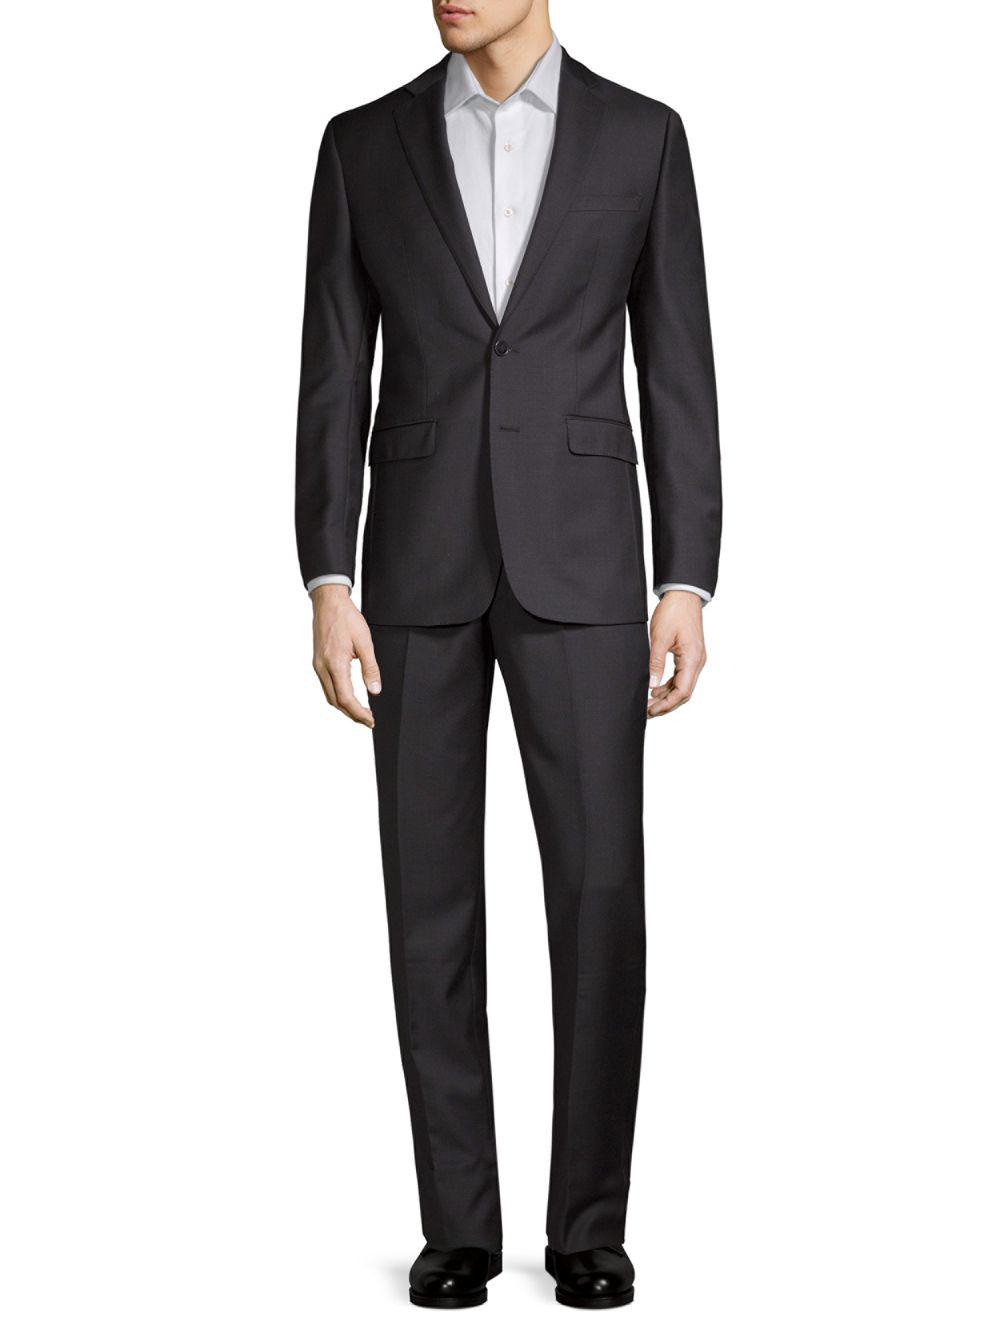 Lyst - Calvin Klein Wool Extreme Slim-fit Suit in Gray for Men - Save ...